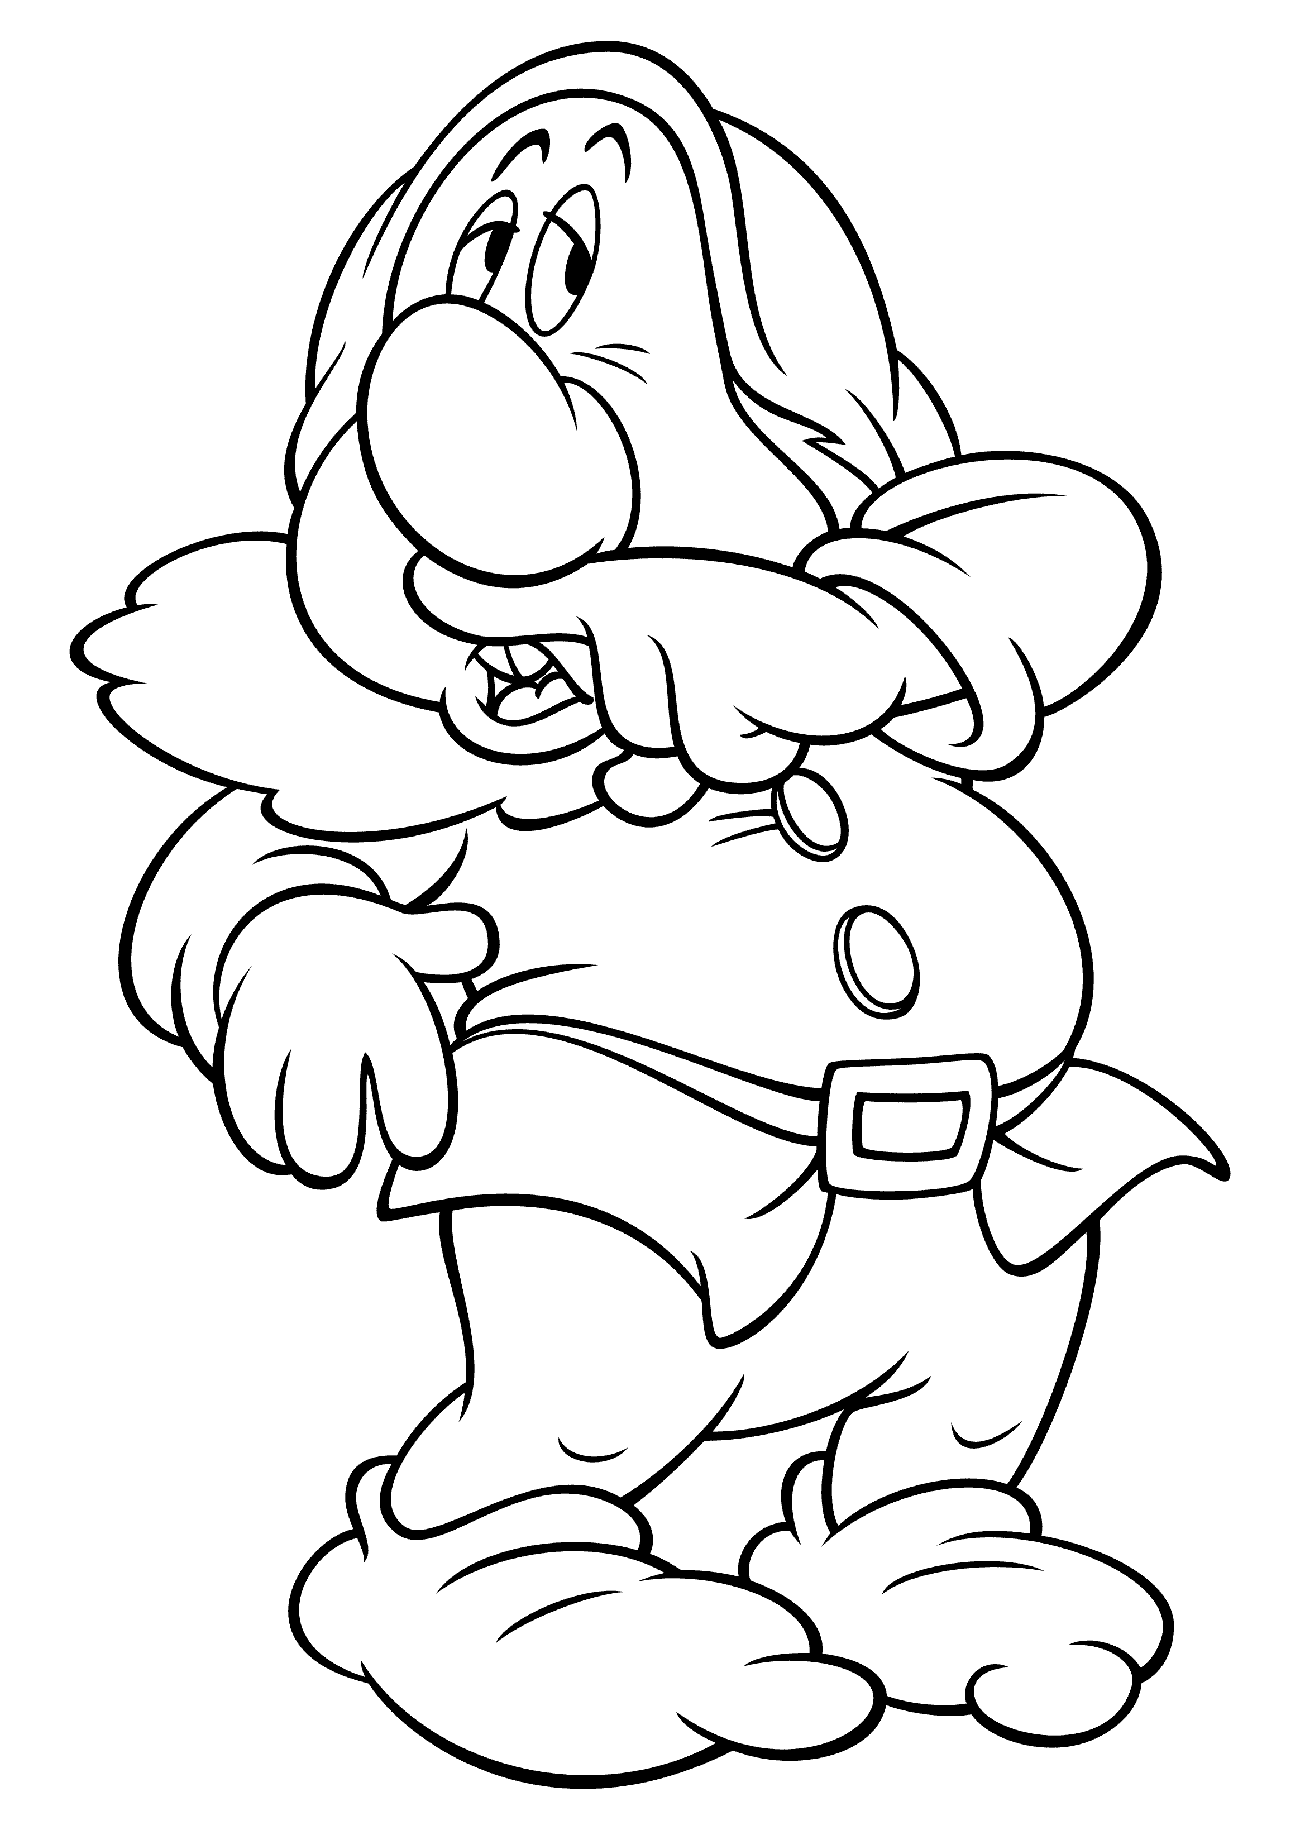 Coloring page Sneezy